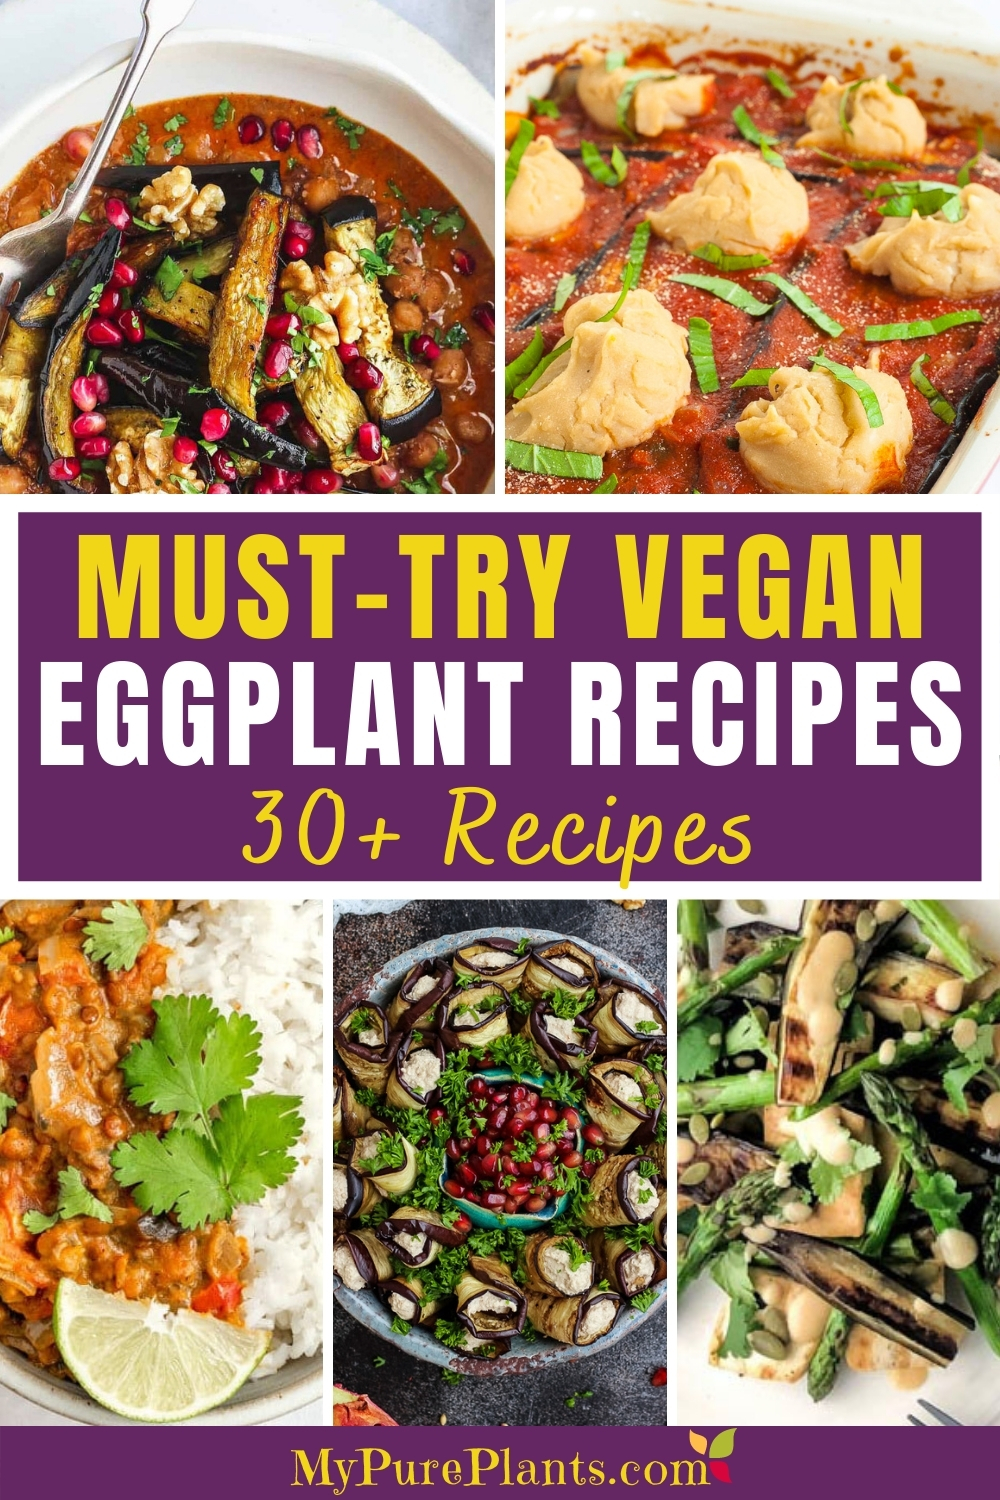 Collage of images showing different vegan eggplant recipes